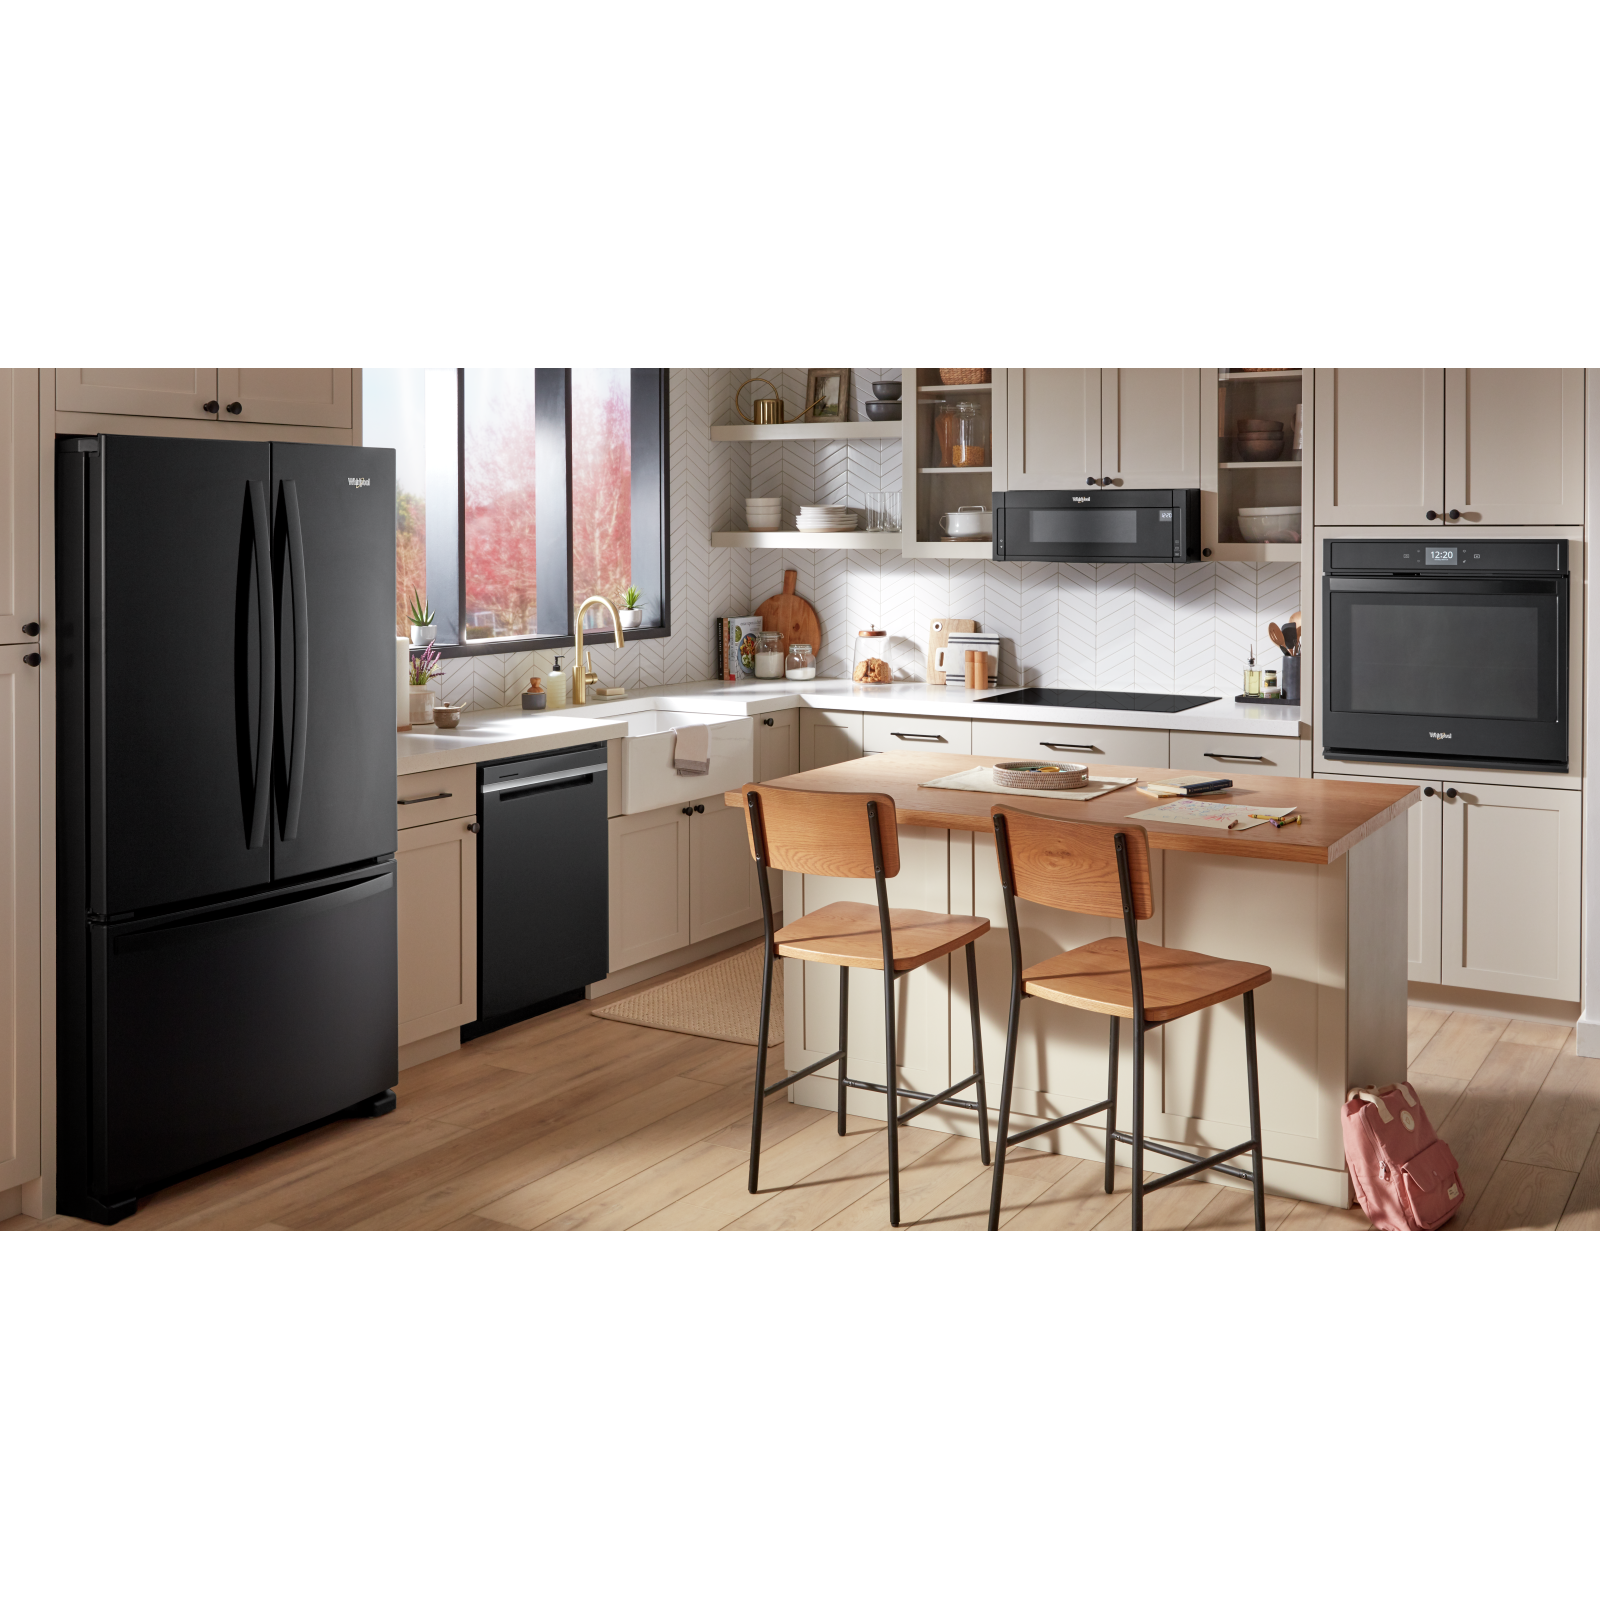 Whirlpool - 5 cu. ft Single Wall Oven in Black - WOS51EC0HB